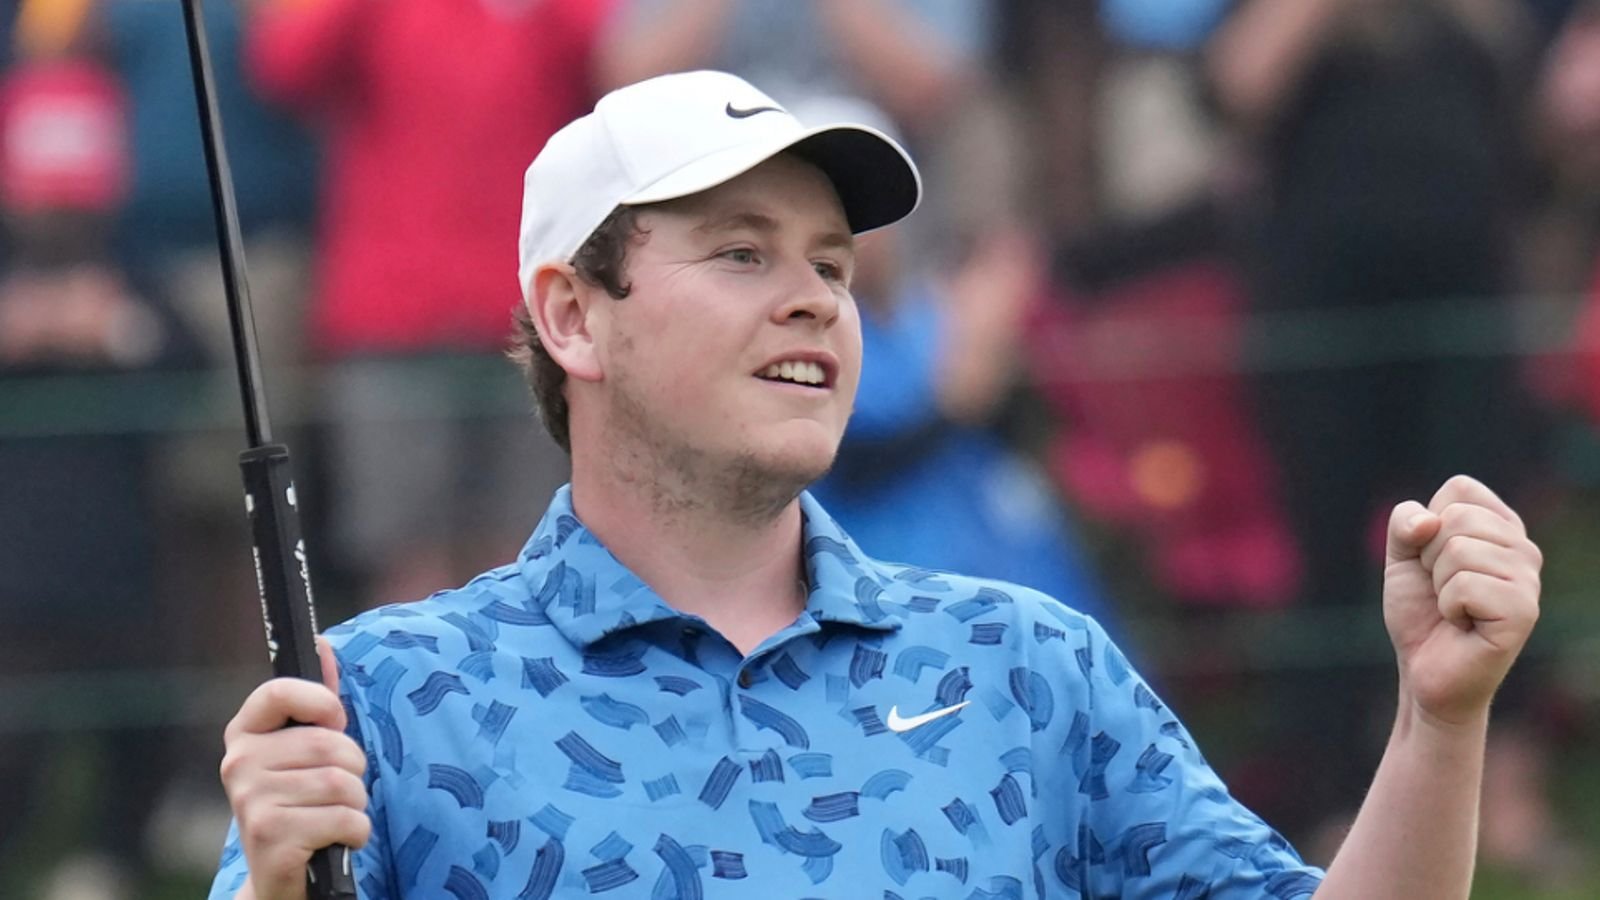 Canadian Open: Robert MacIntyre clings on to claim first PGA Tour title | Golf News